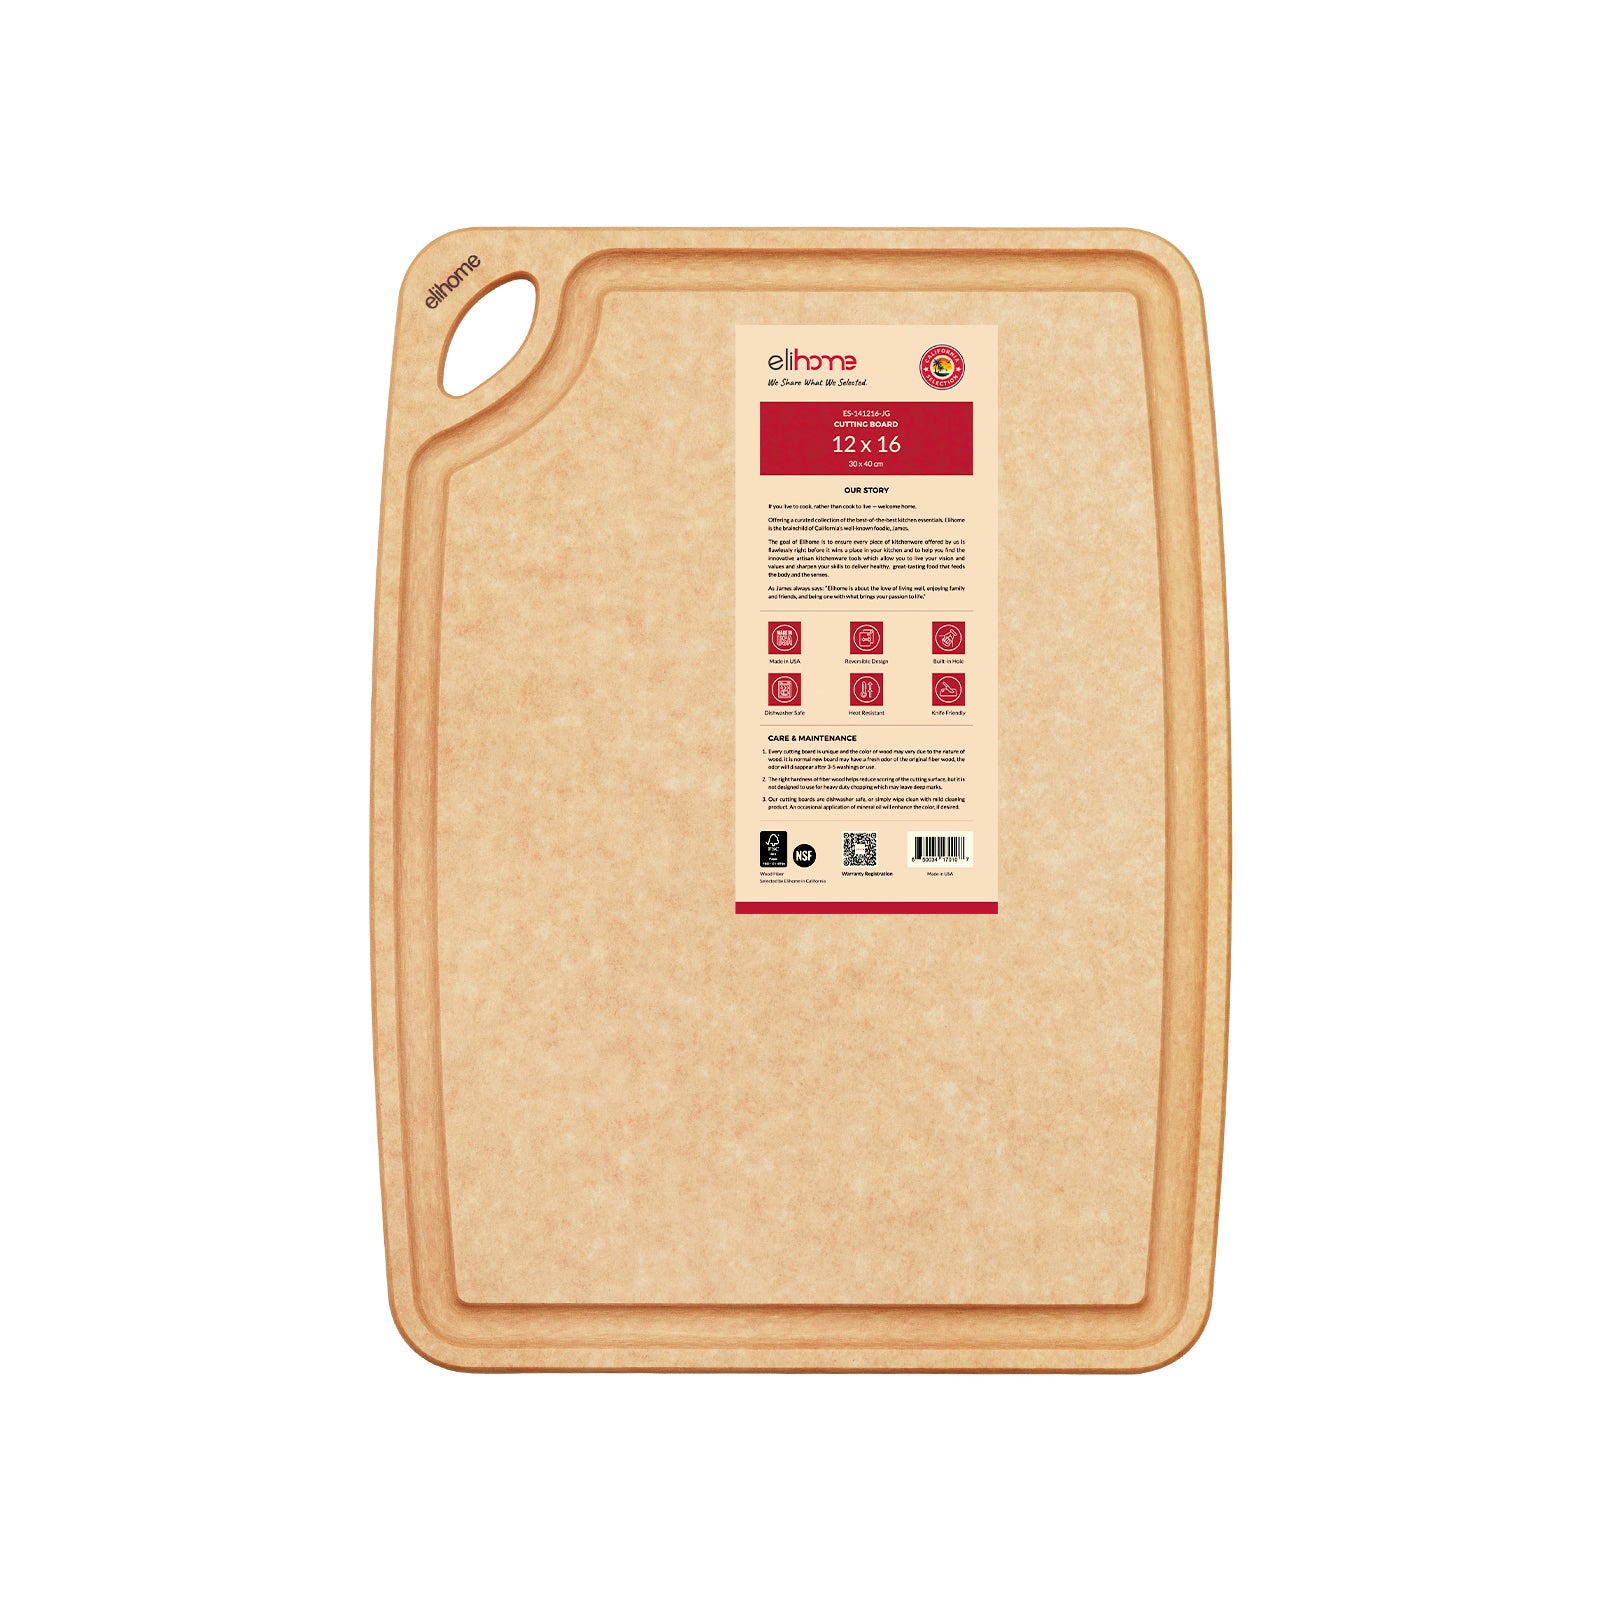 Elihome Essential Series Cutting Board for Kitchen- Natural Wood